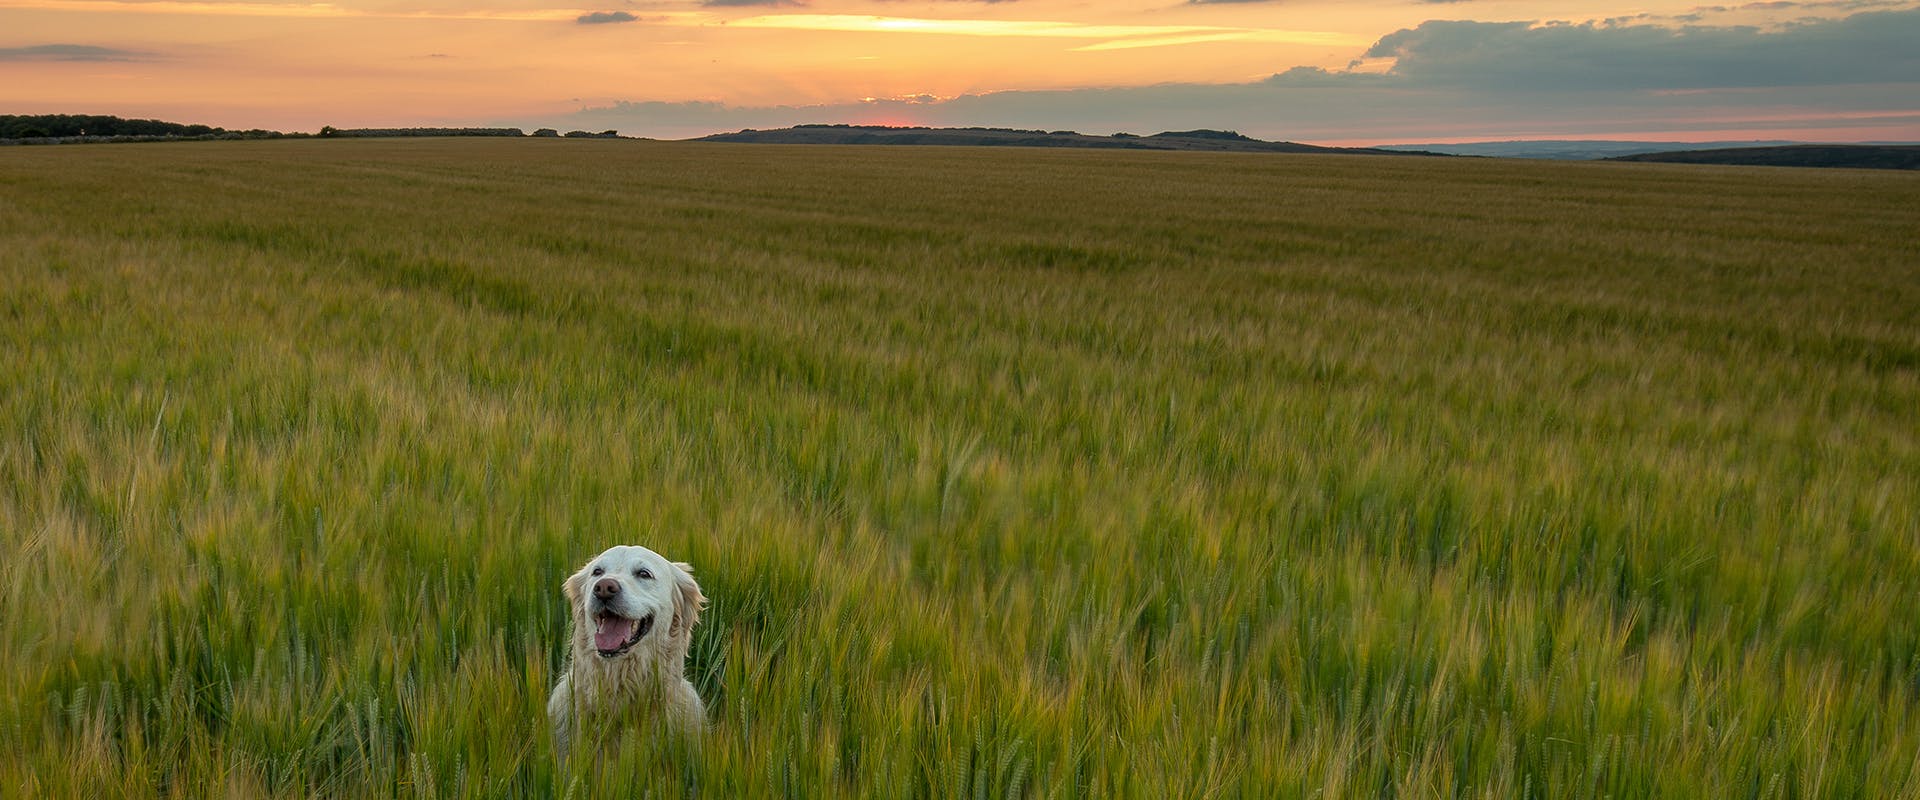 A dog standing in a field